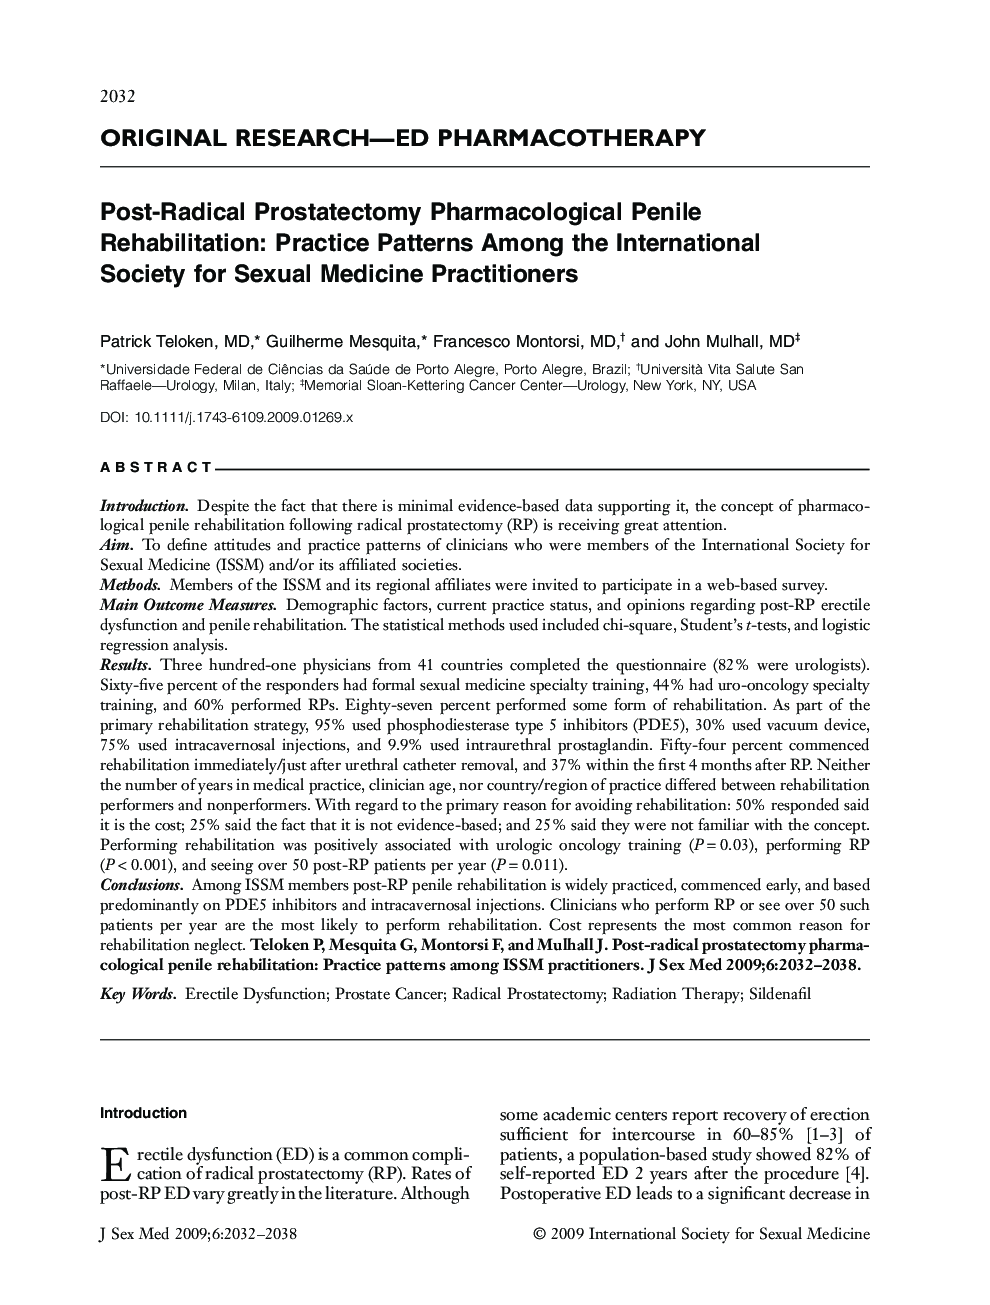 ORIGINAL RESEARCH-ED PHARMACOTHERAPY: Post-Radical Prostatectomy Pharmacological Penile Rehabilitation: Practice Patterns Among the International Society for Sexual Medicine Practitioners